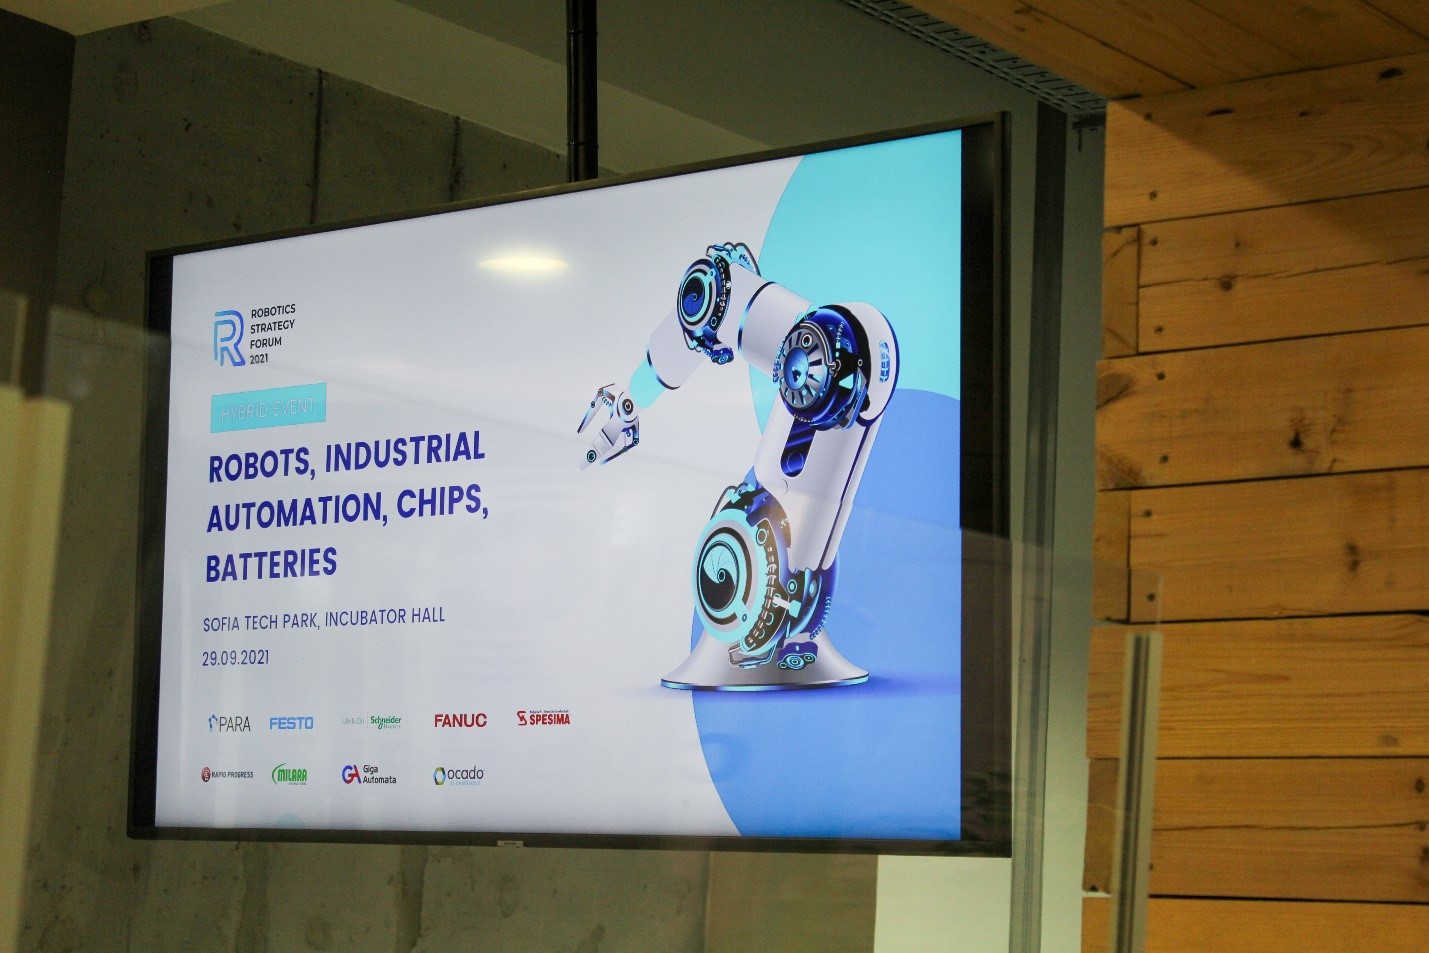 High-tech industry was presented at Robotics Strategy Forum 2021